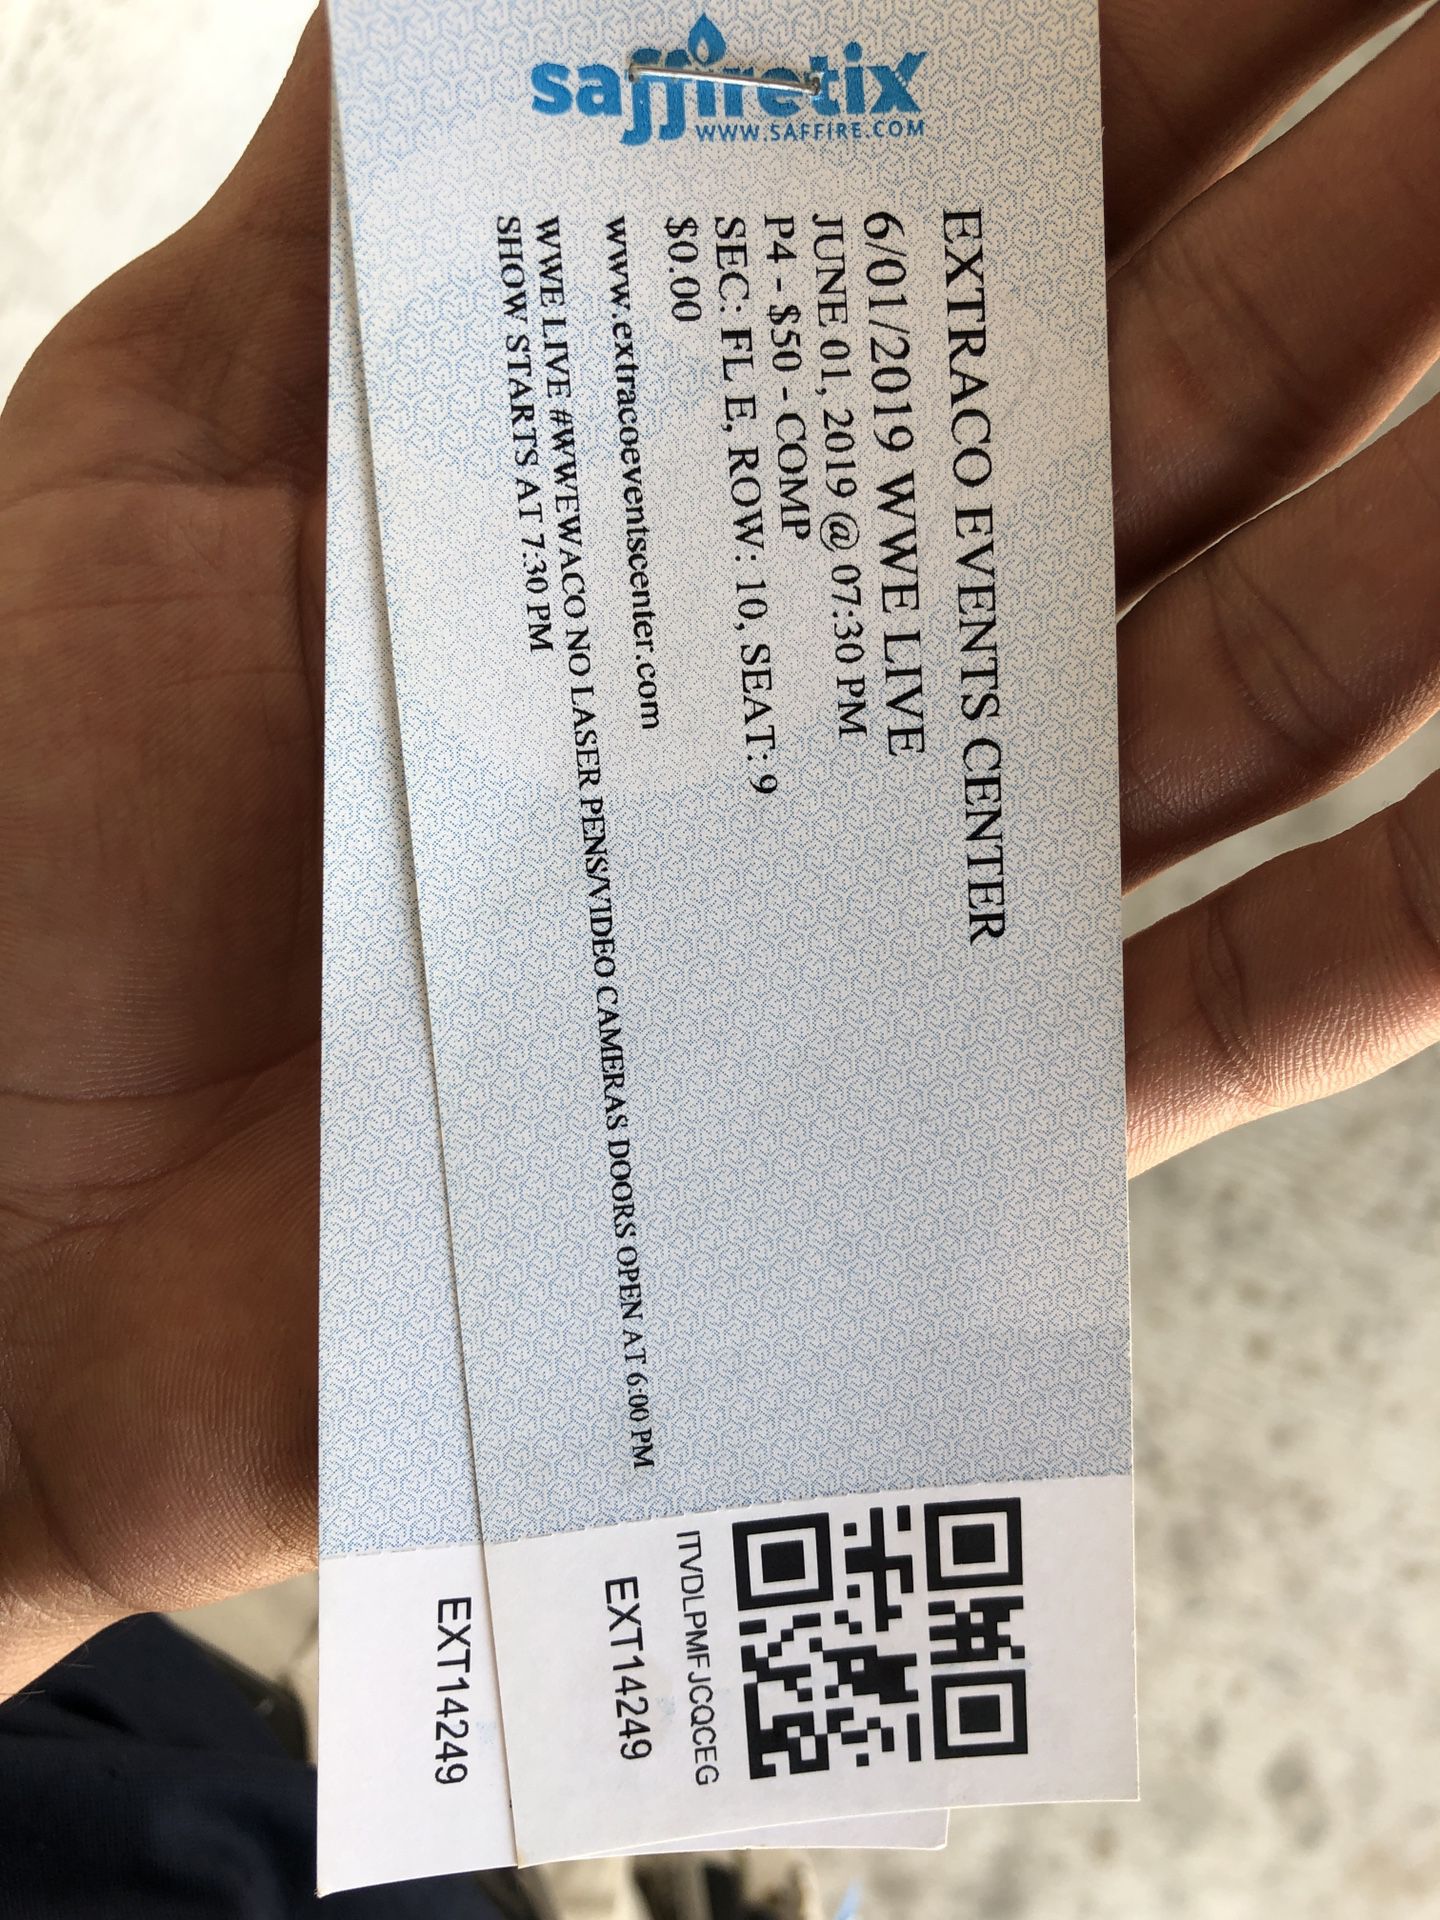 WWE tickets for tonight’s event